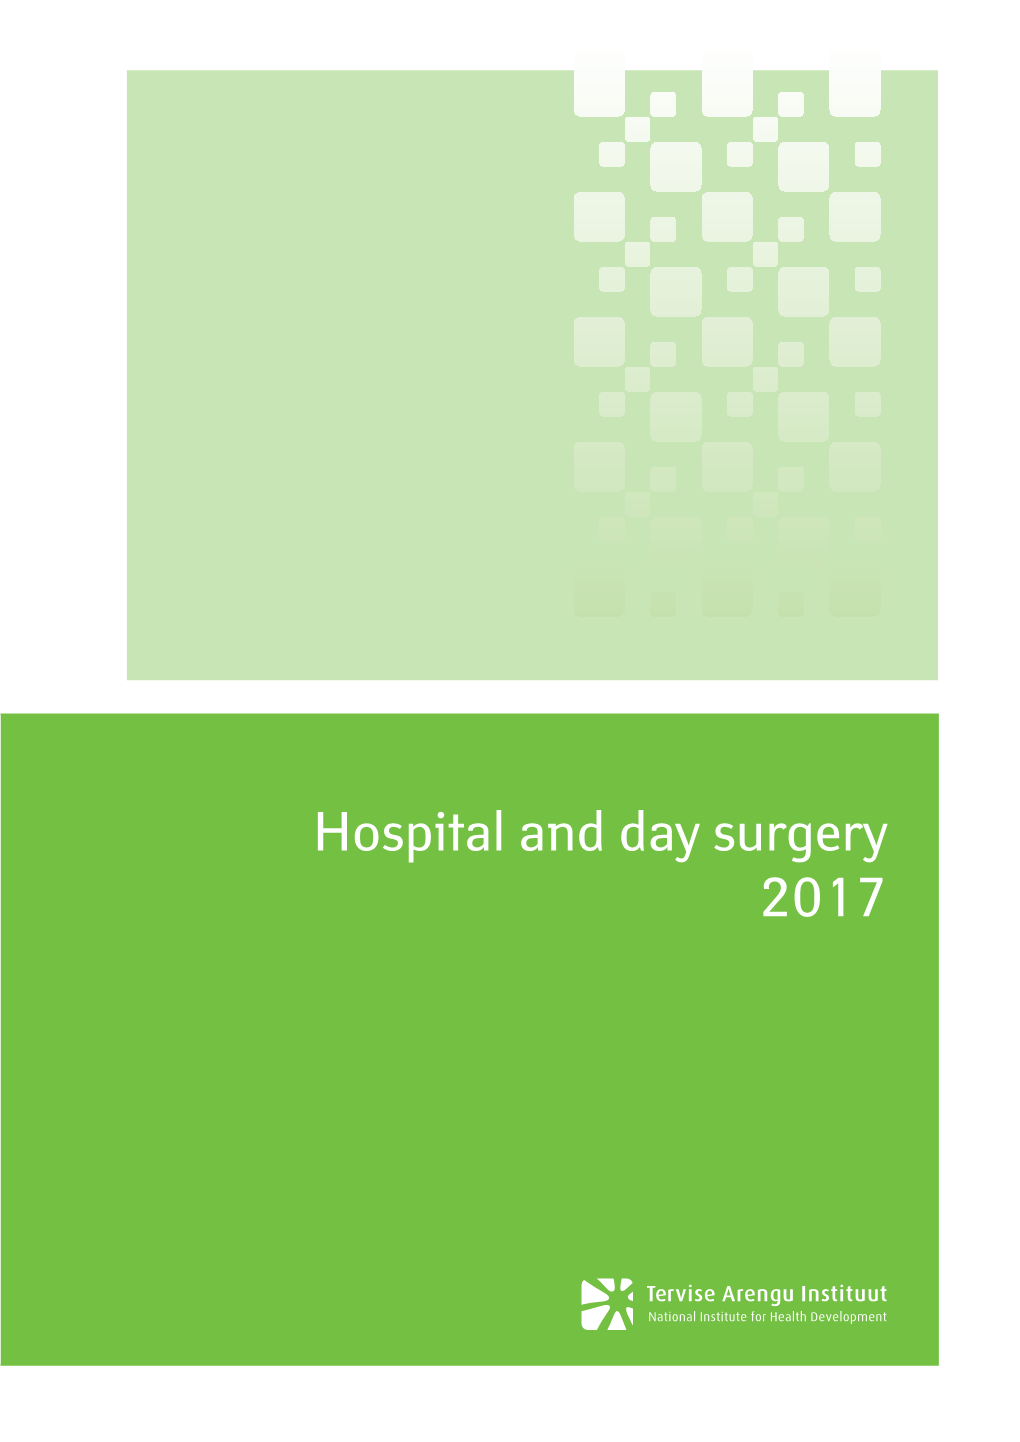 Hospital and Day Surgery 2017 National Institute for Health Development